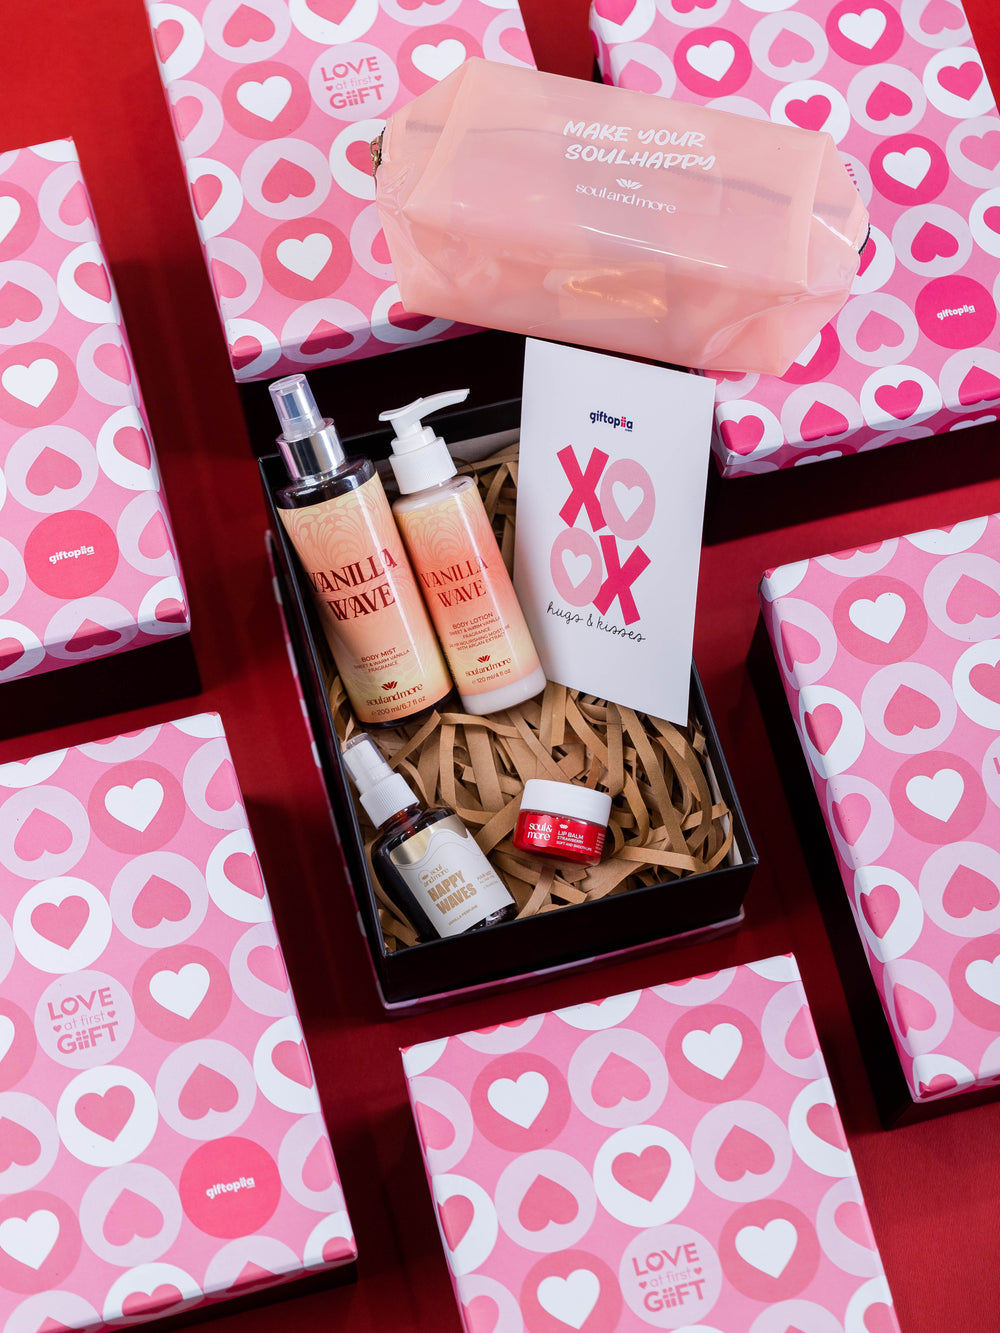 Ready Made Gifts-Love in a Box